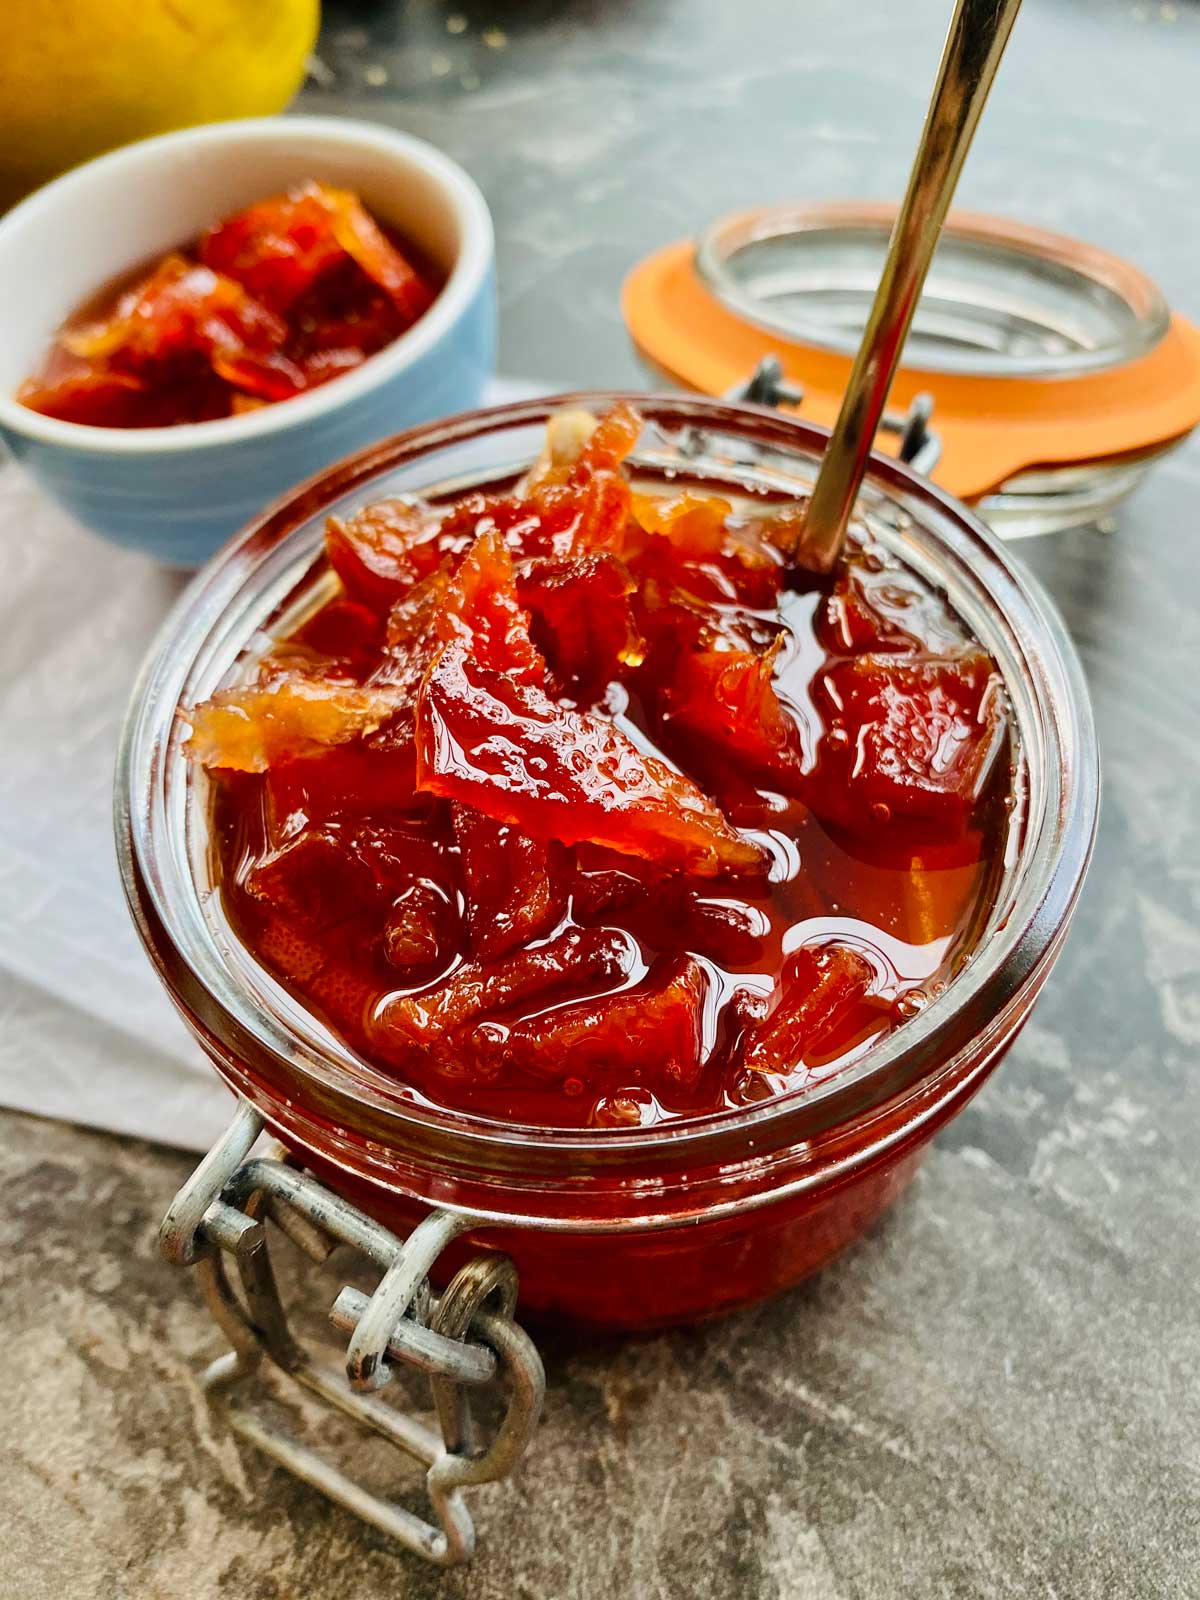 Close up of deep orange-red junky quince jam in a preserve jar with the lid opened and a teaspoon in